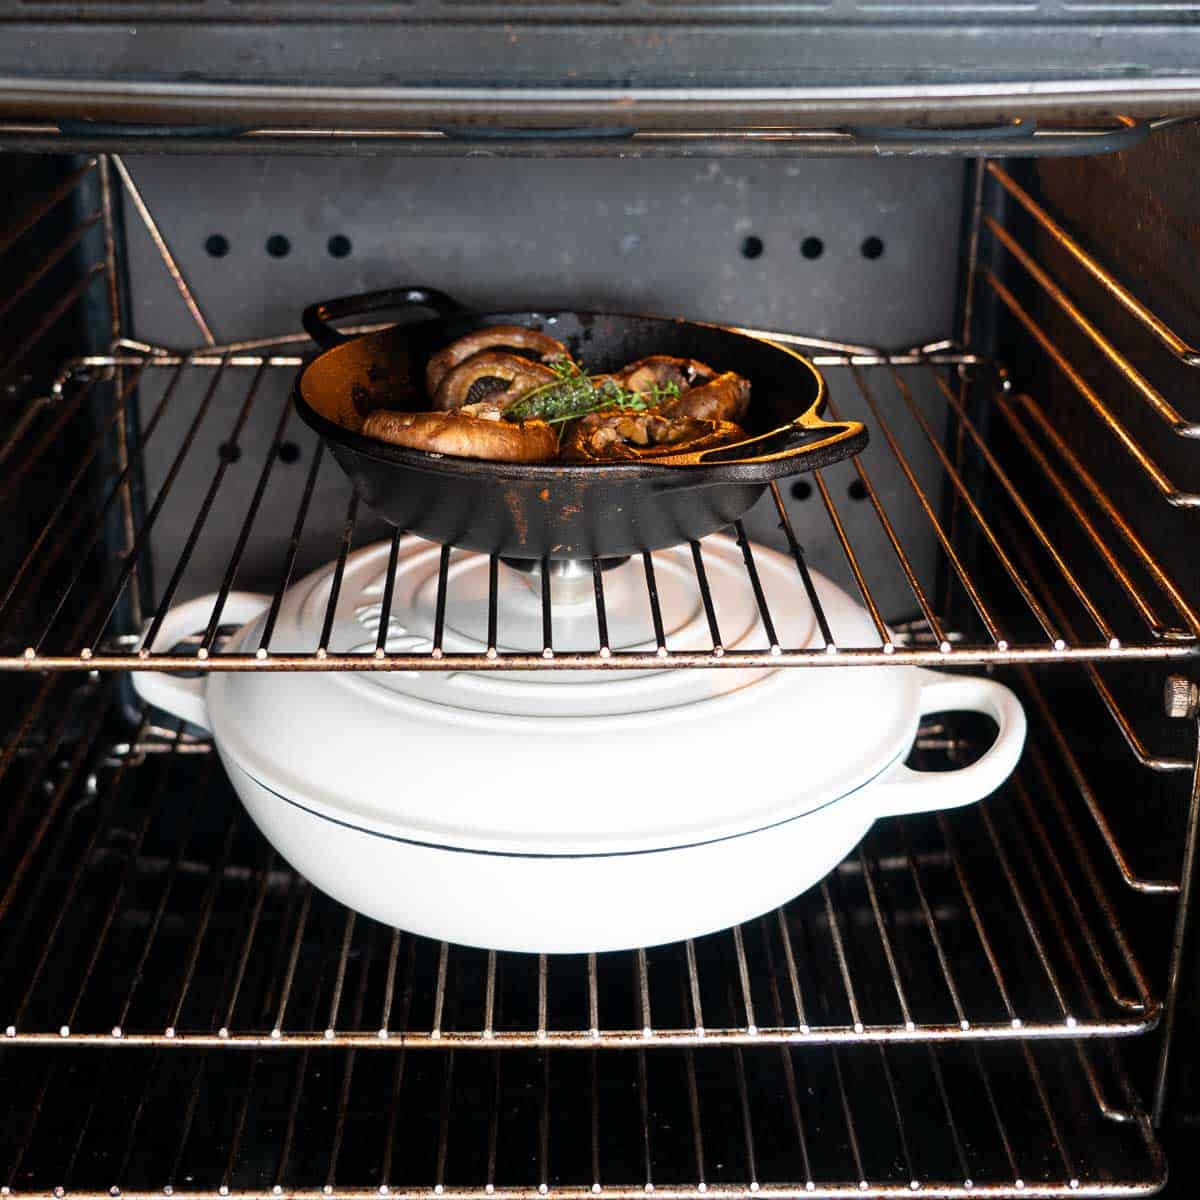 An oven containing a roasting dish of mushrooms and a large white enamel lidded dish.